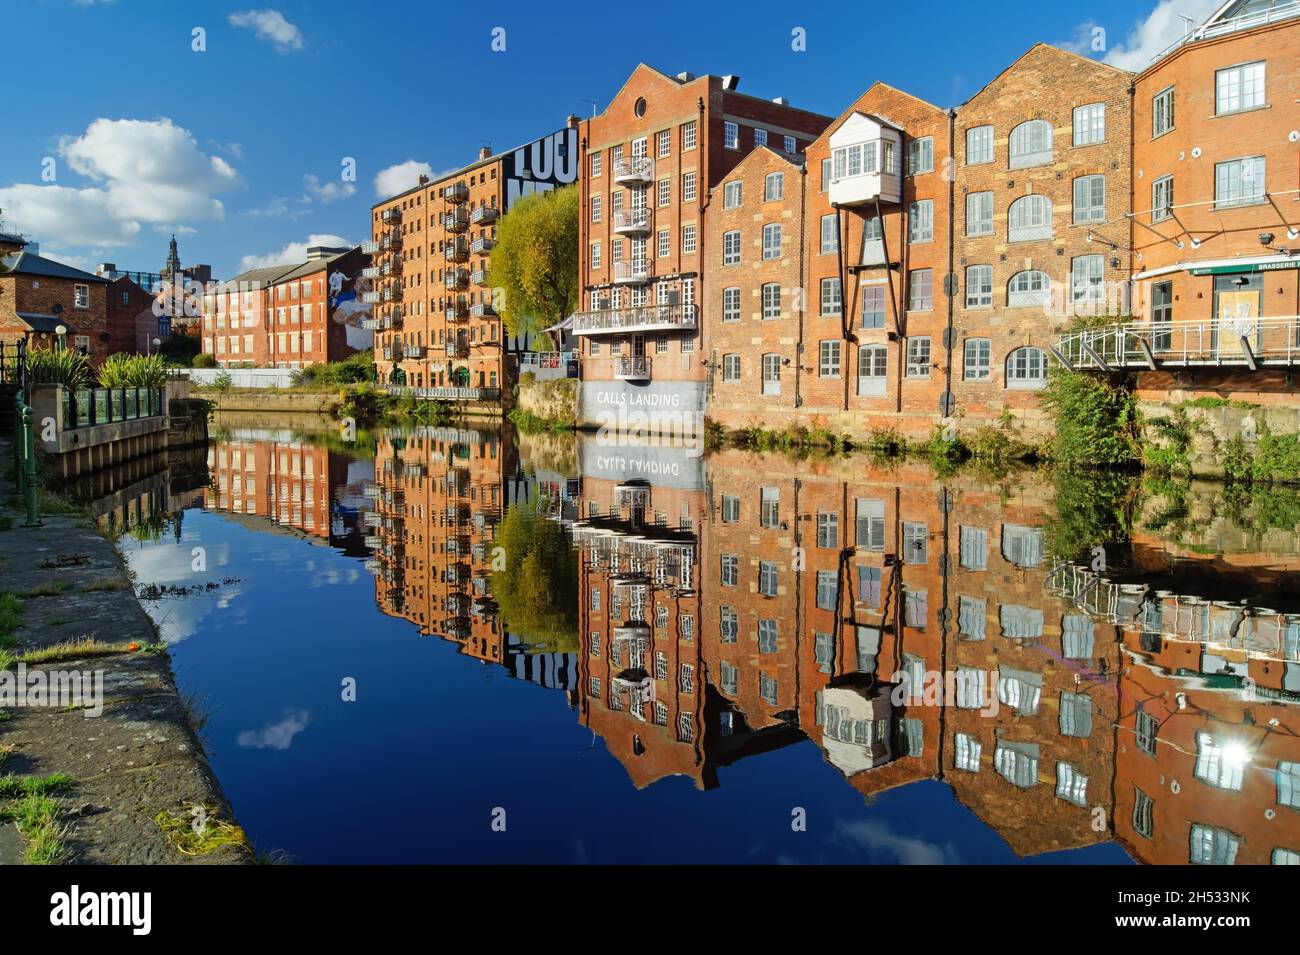 UK, West Yorkshire, Leeds, River Aire at Calls Landing viewed from Brewery Place. Stock Photo